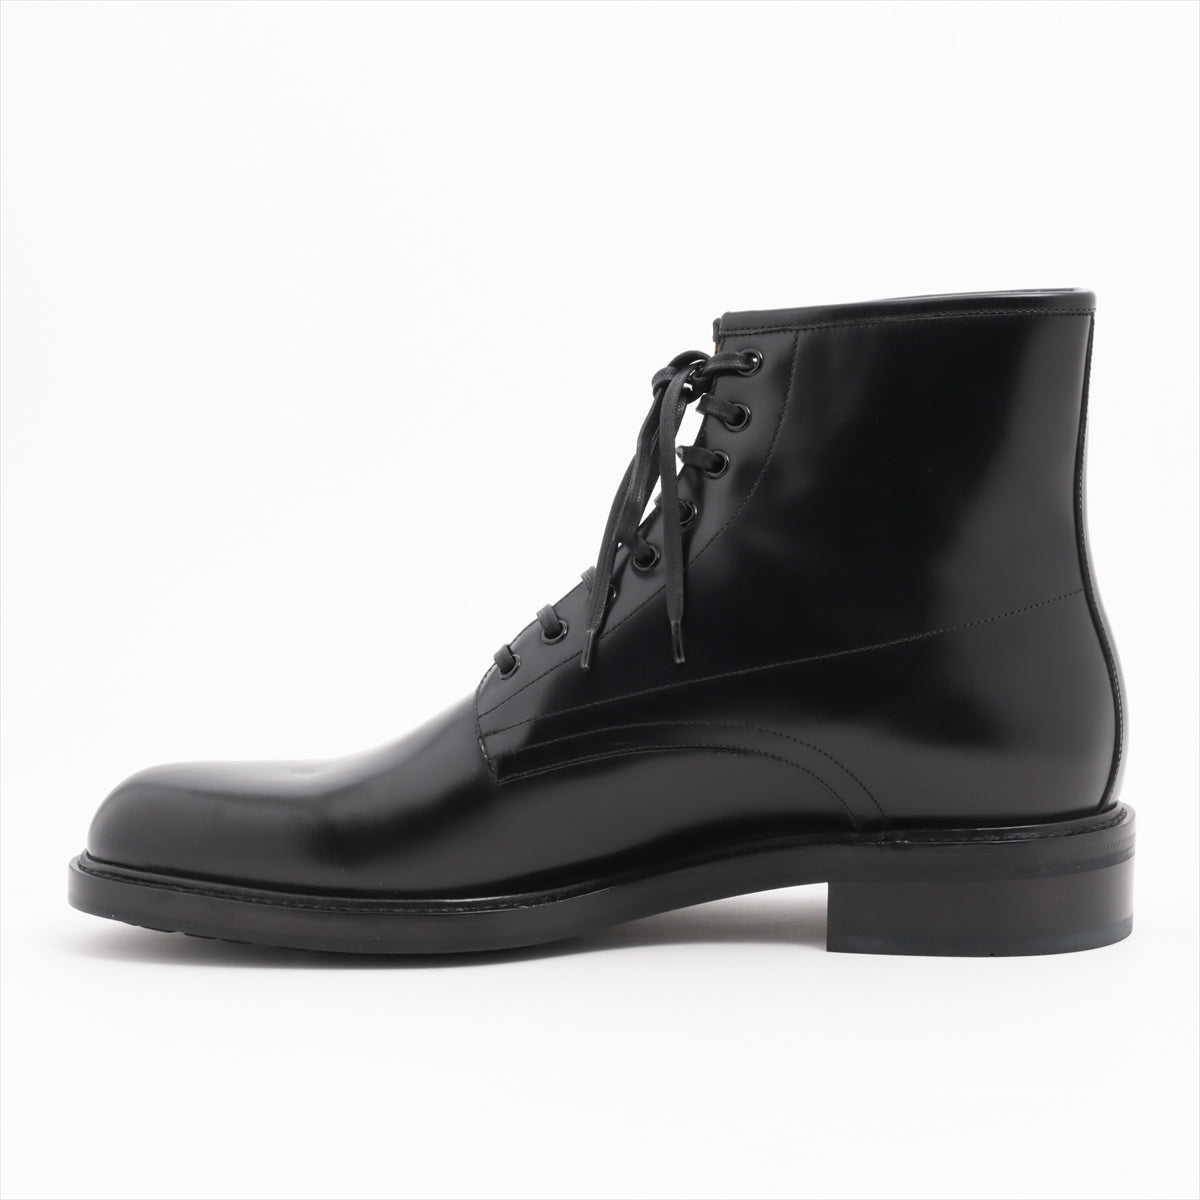 Louis Vuitton 16 years Leather Boots 9 1/2M Men's Black DI1106 Replacement Laces Included